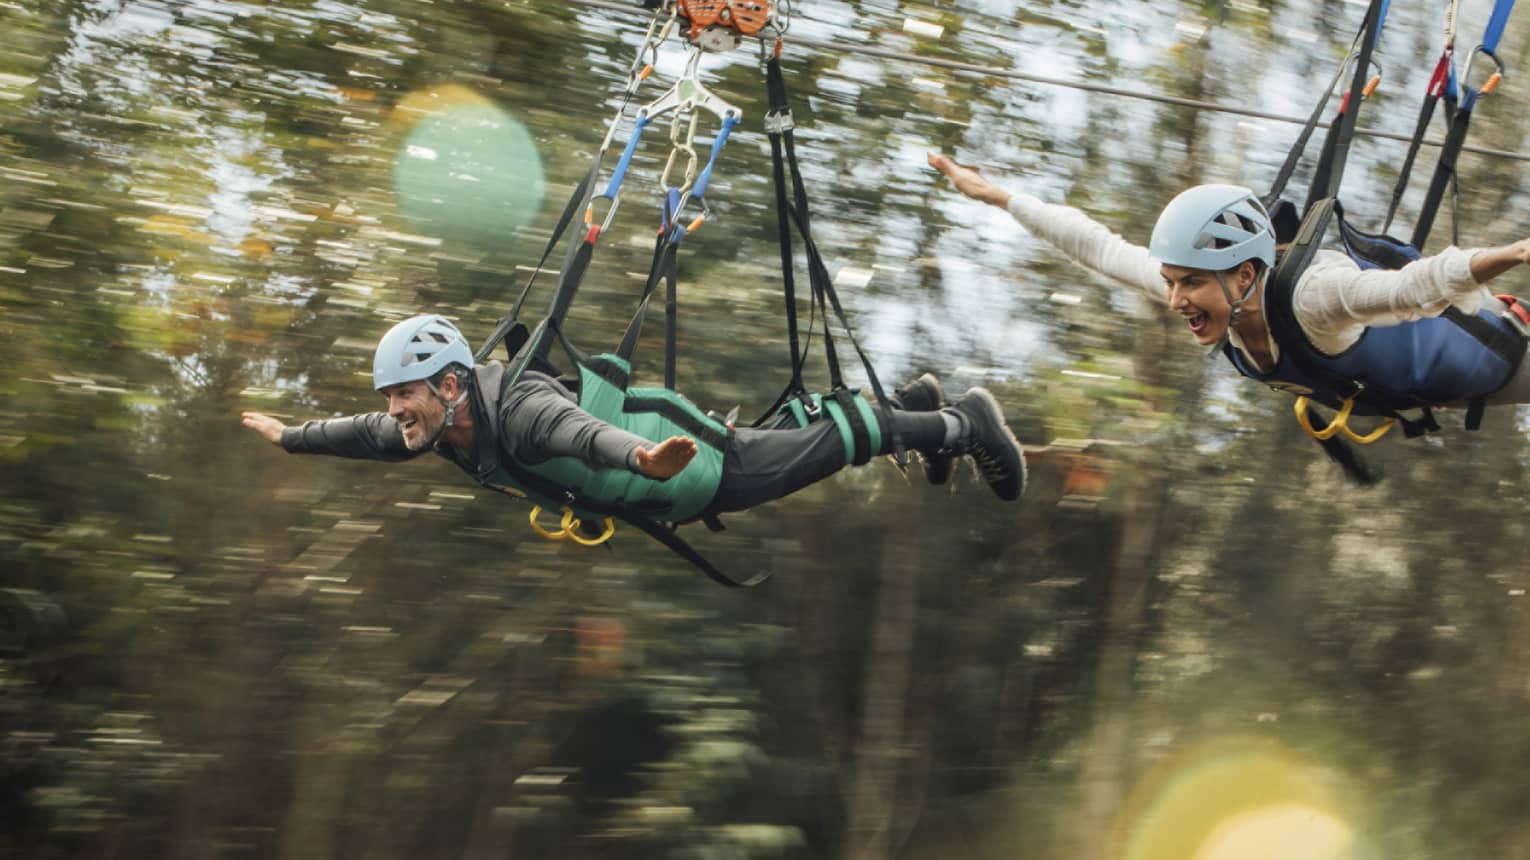 Close-up of a couple in full safety gear with wide smiles and arms outstretched as they zip-line past a blur of treetops.